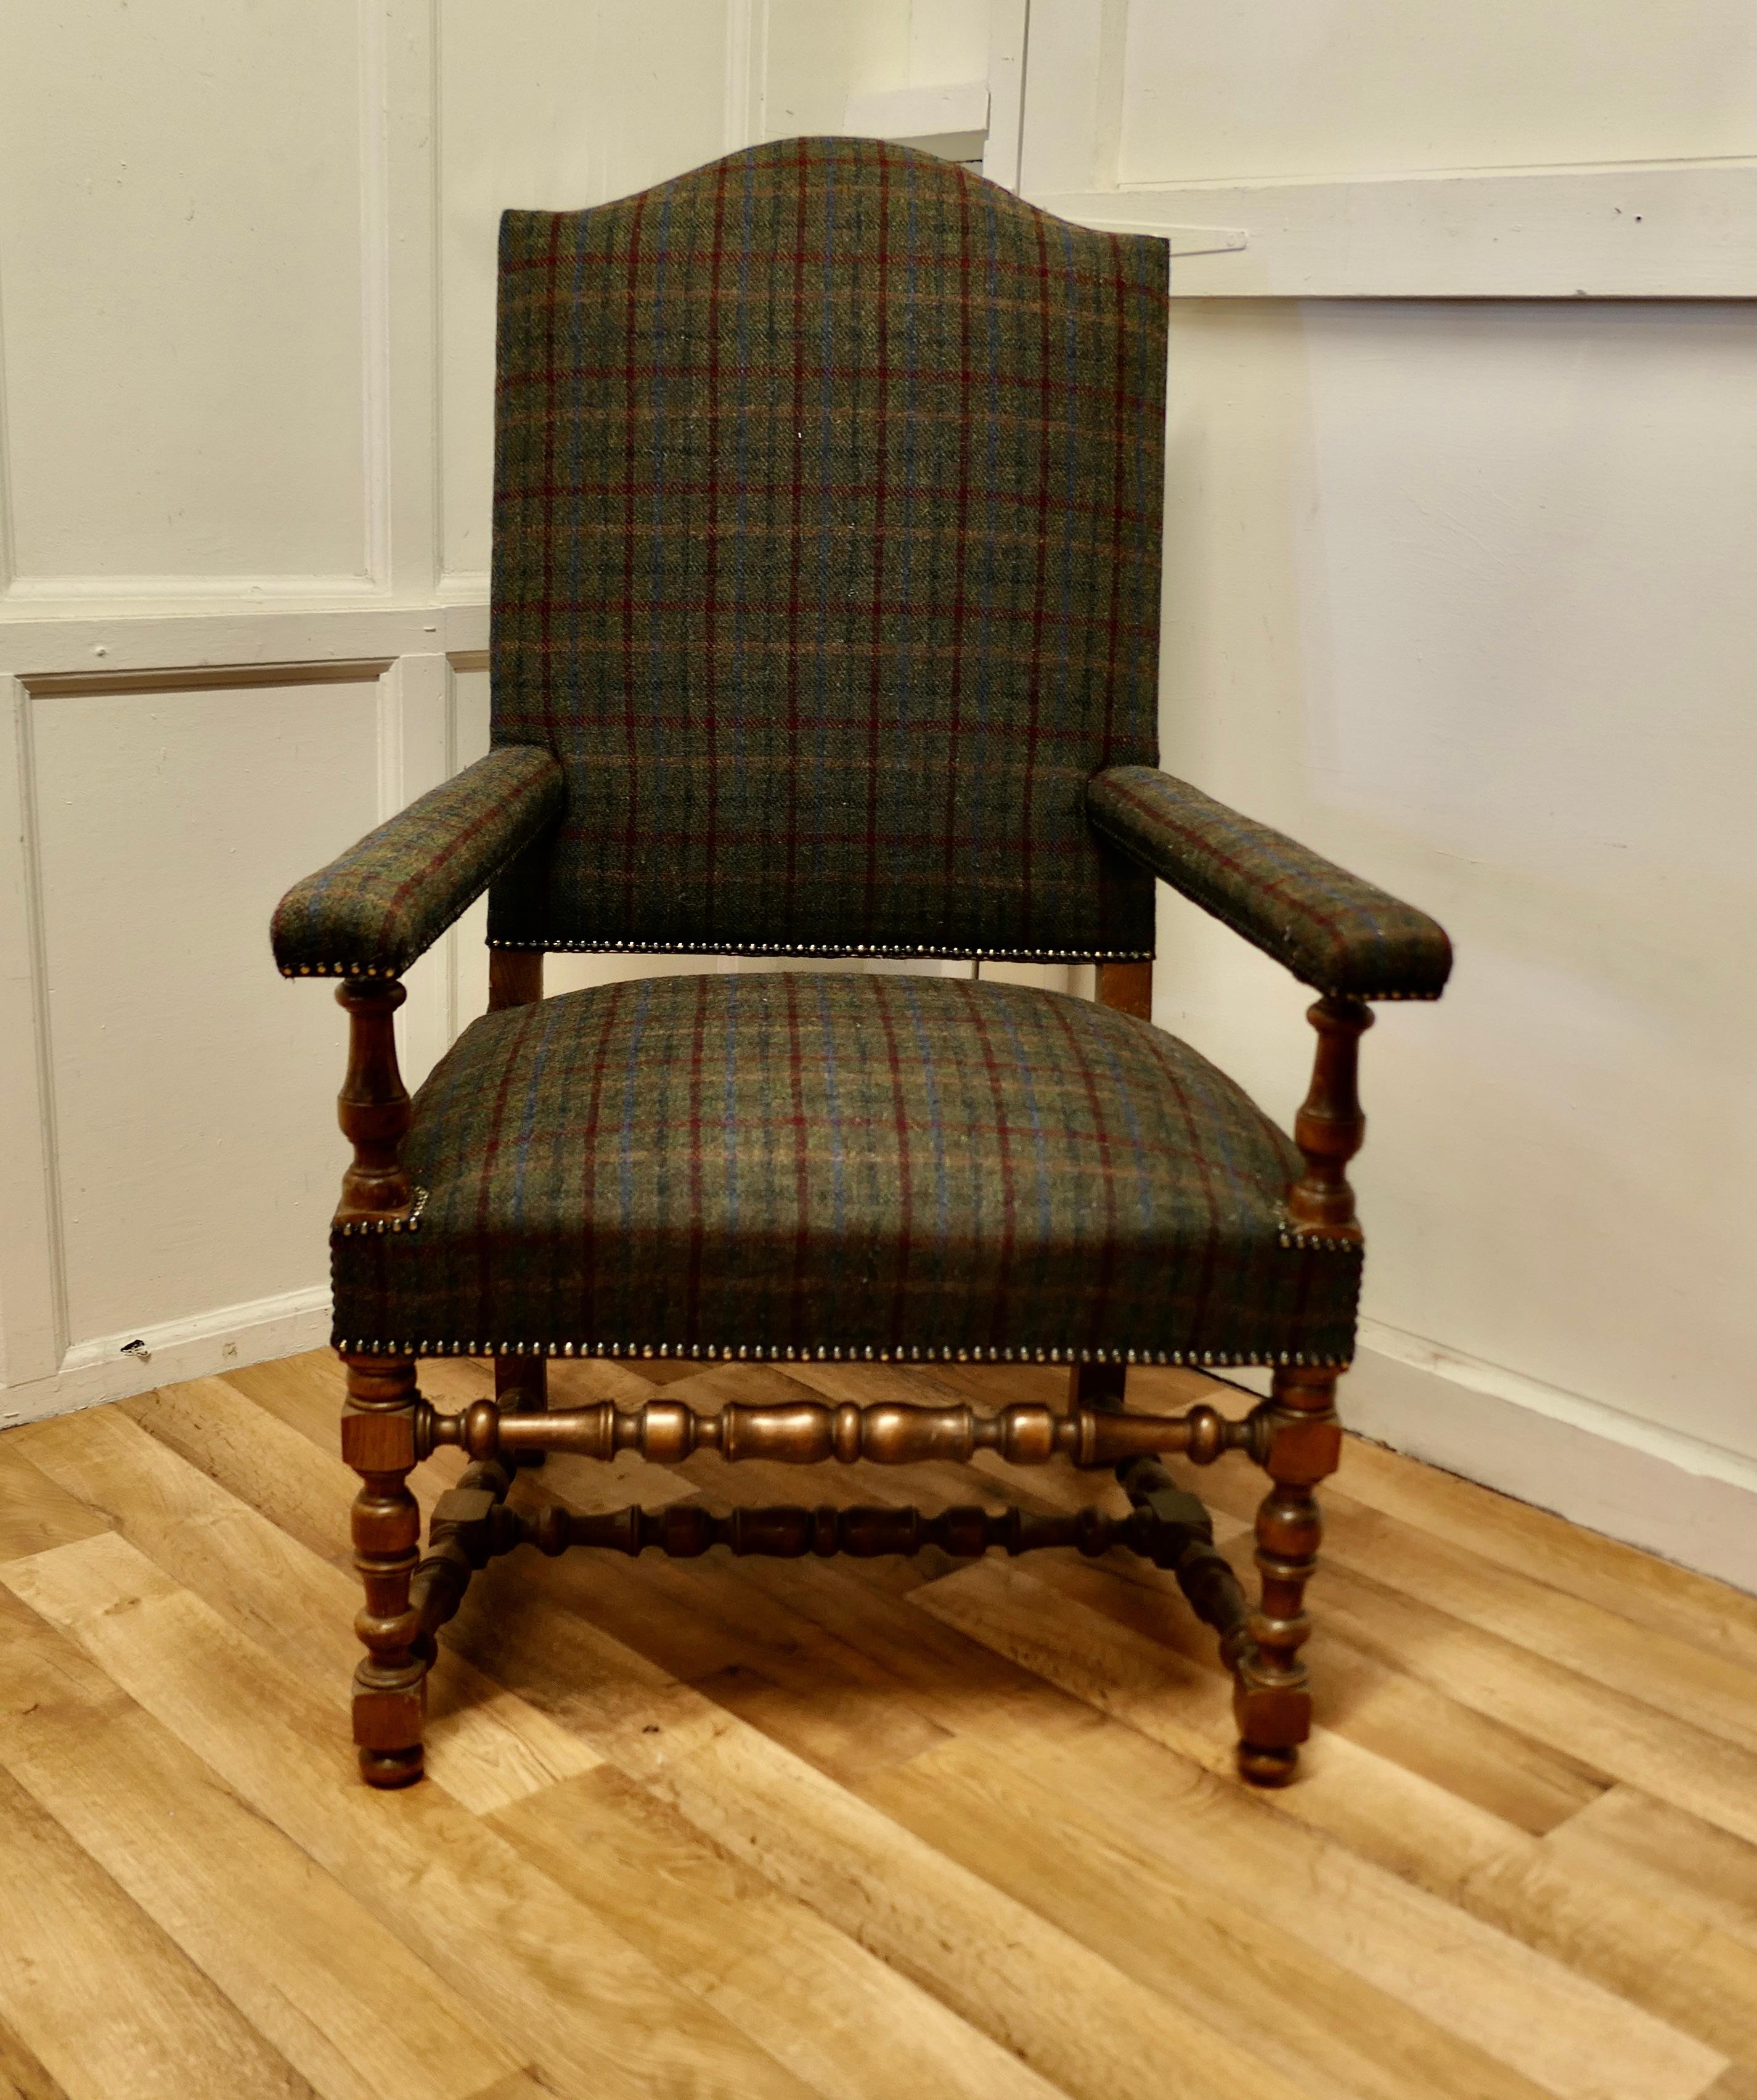 Arts and crafts golden oak library chair, Throne Chair

This is an oversize arm chair it is made in golden Oak and has been upholstered in 100% Harris Tweed check with brass studs
A good large Arts and Crafts chair brought right up to date, very